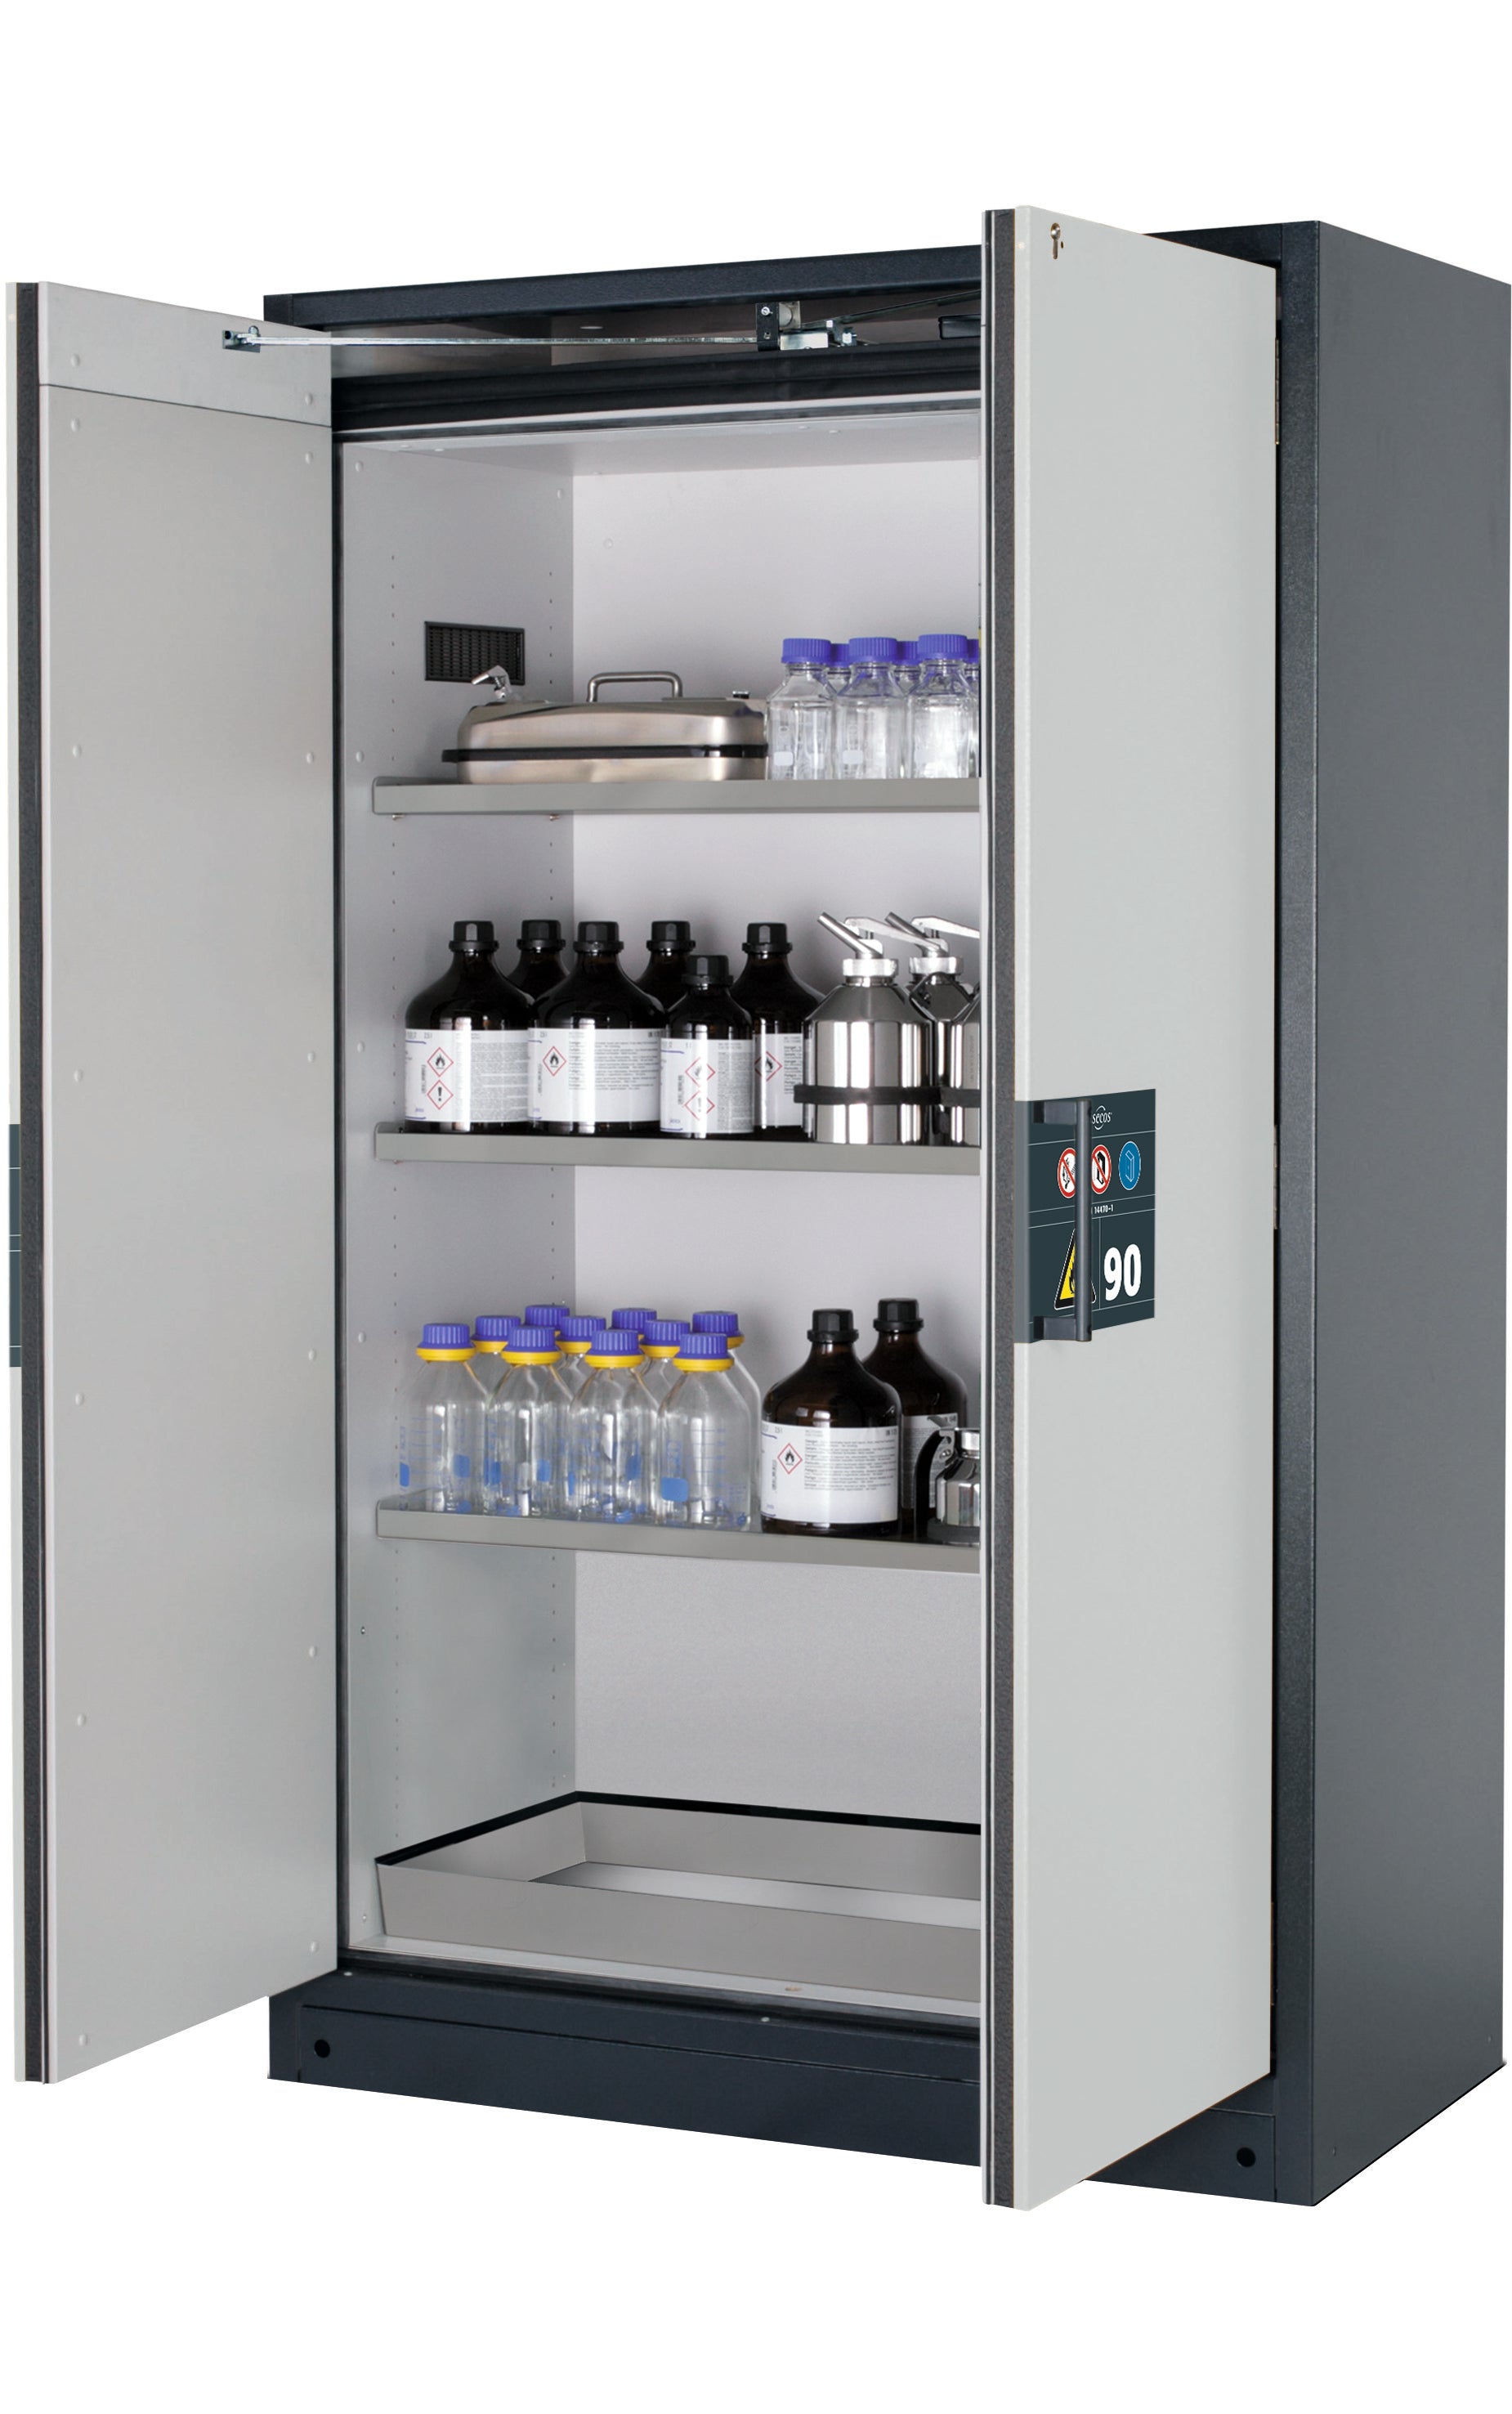 Type 90 safety storage cabinet Q-PEGASUS-90 model Q90.195.120.WDAC in light grey RAL 7035 with 3x shelf standard (stainless steel 1.4301),